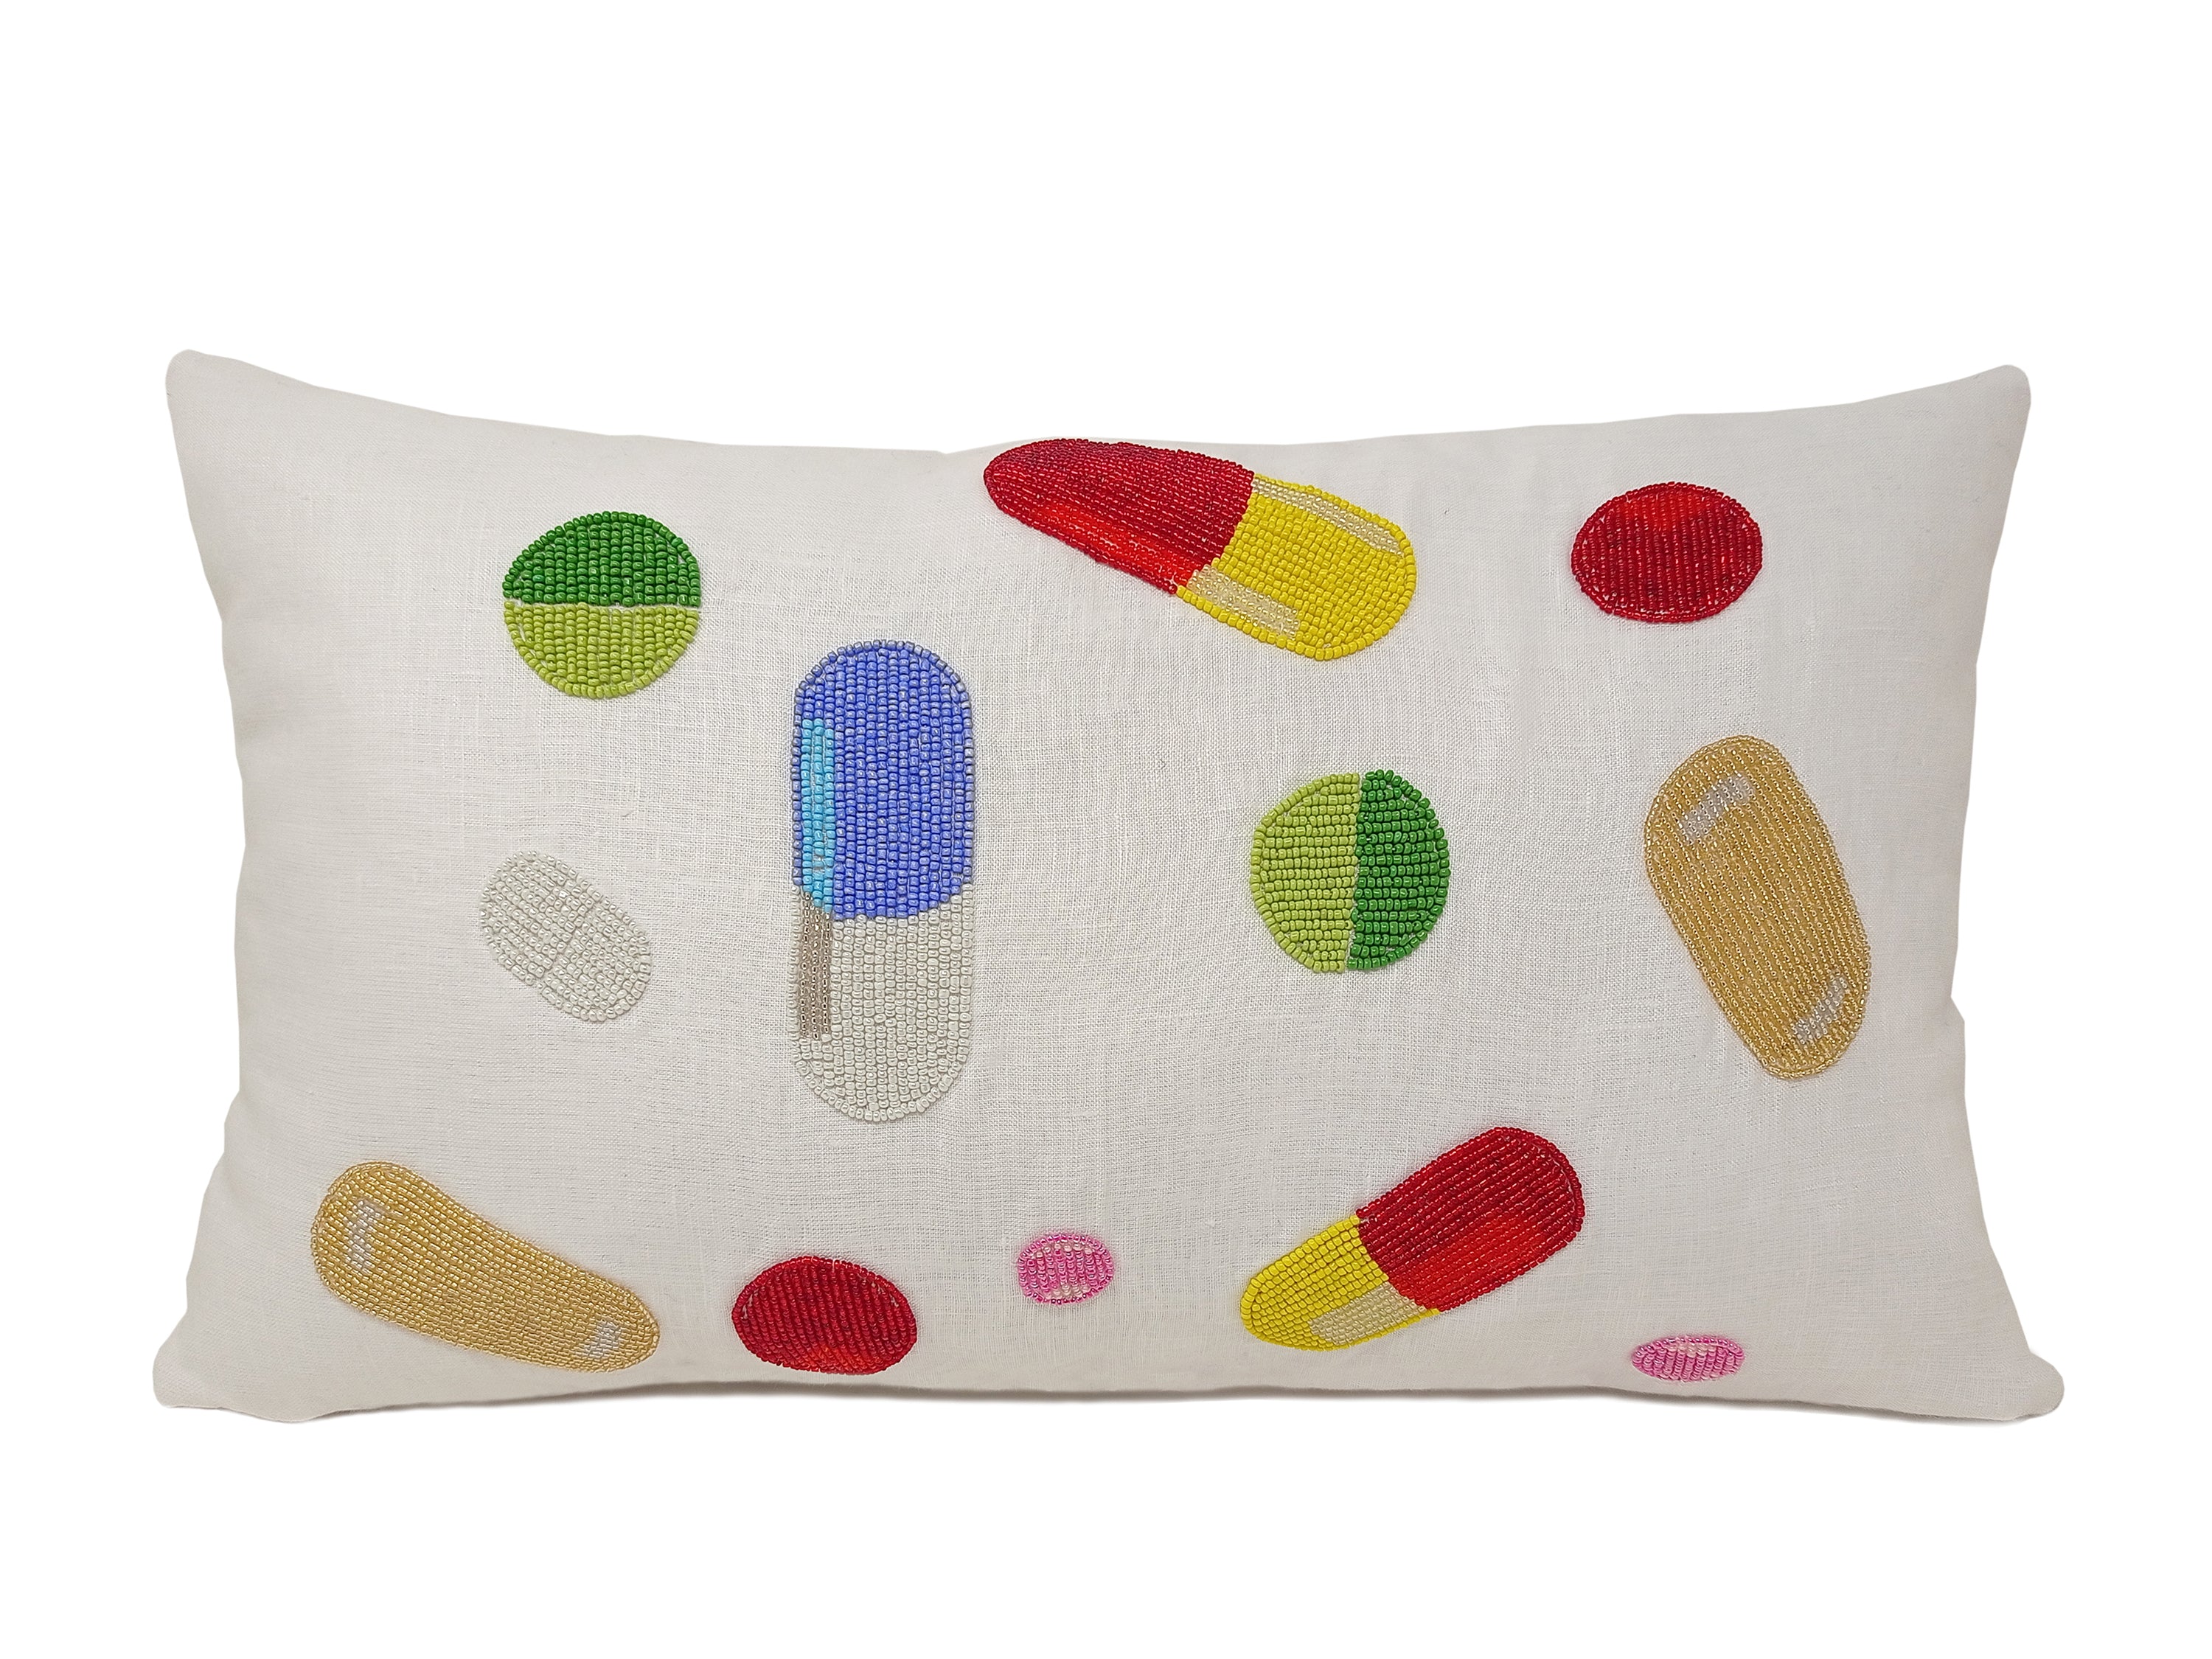 Embellished Throw Pillow